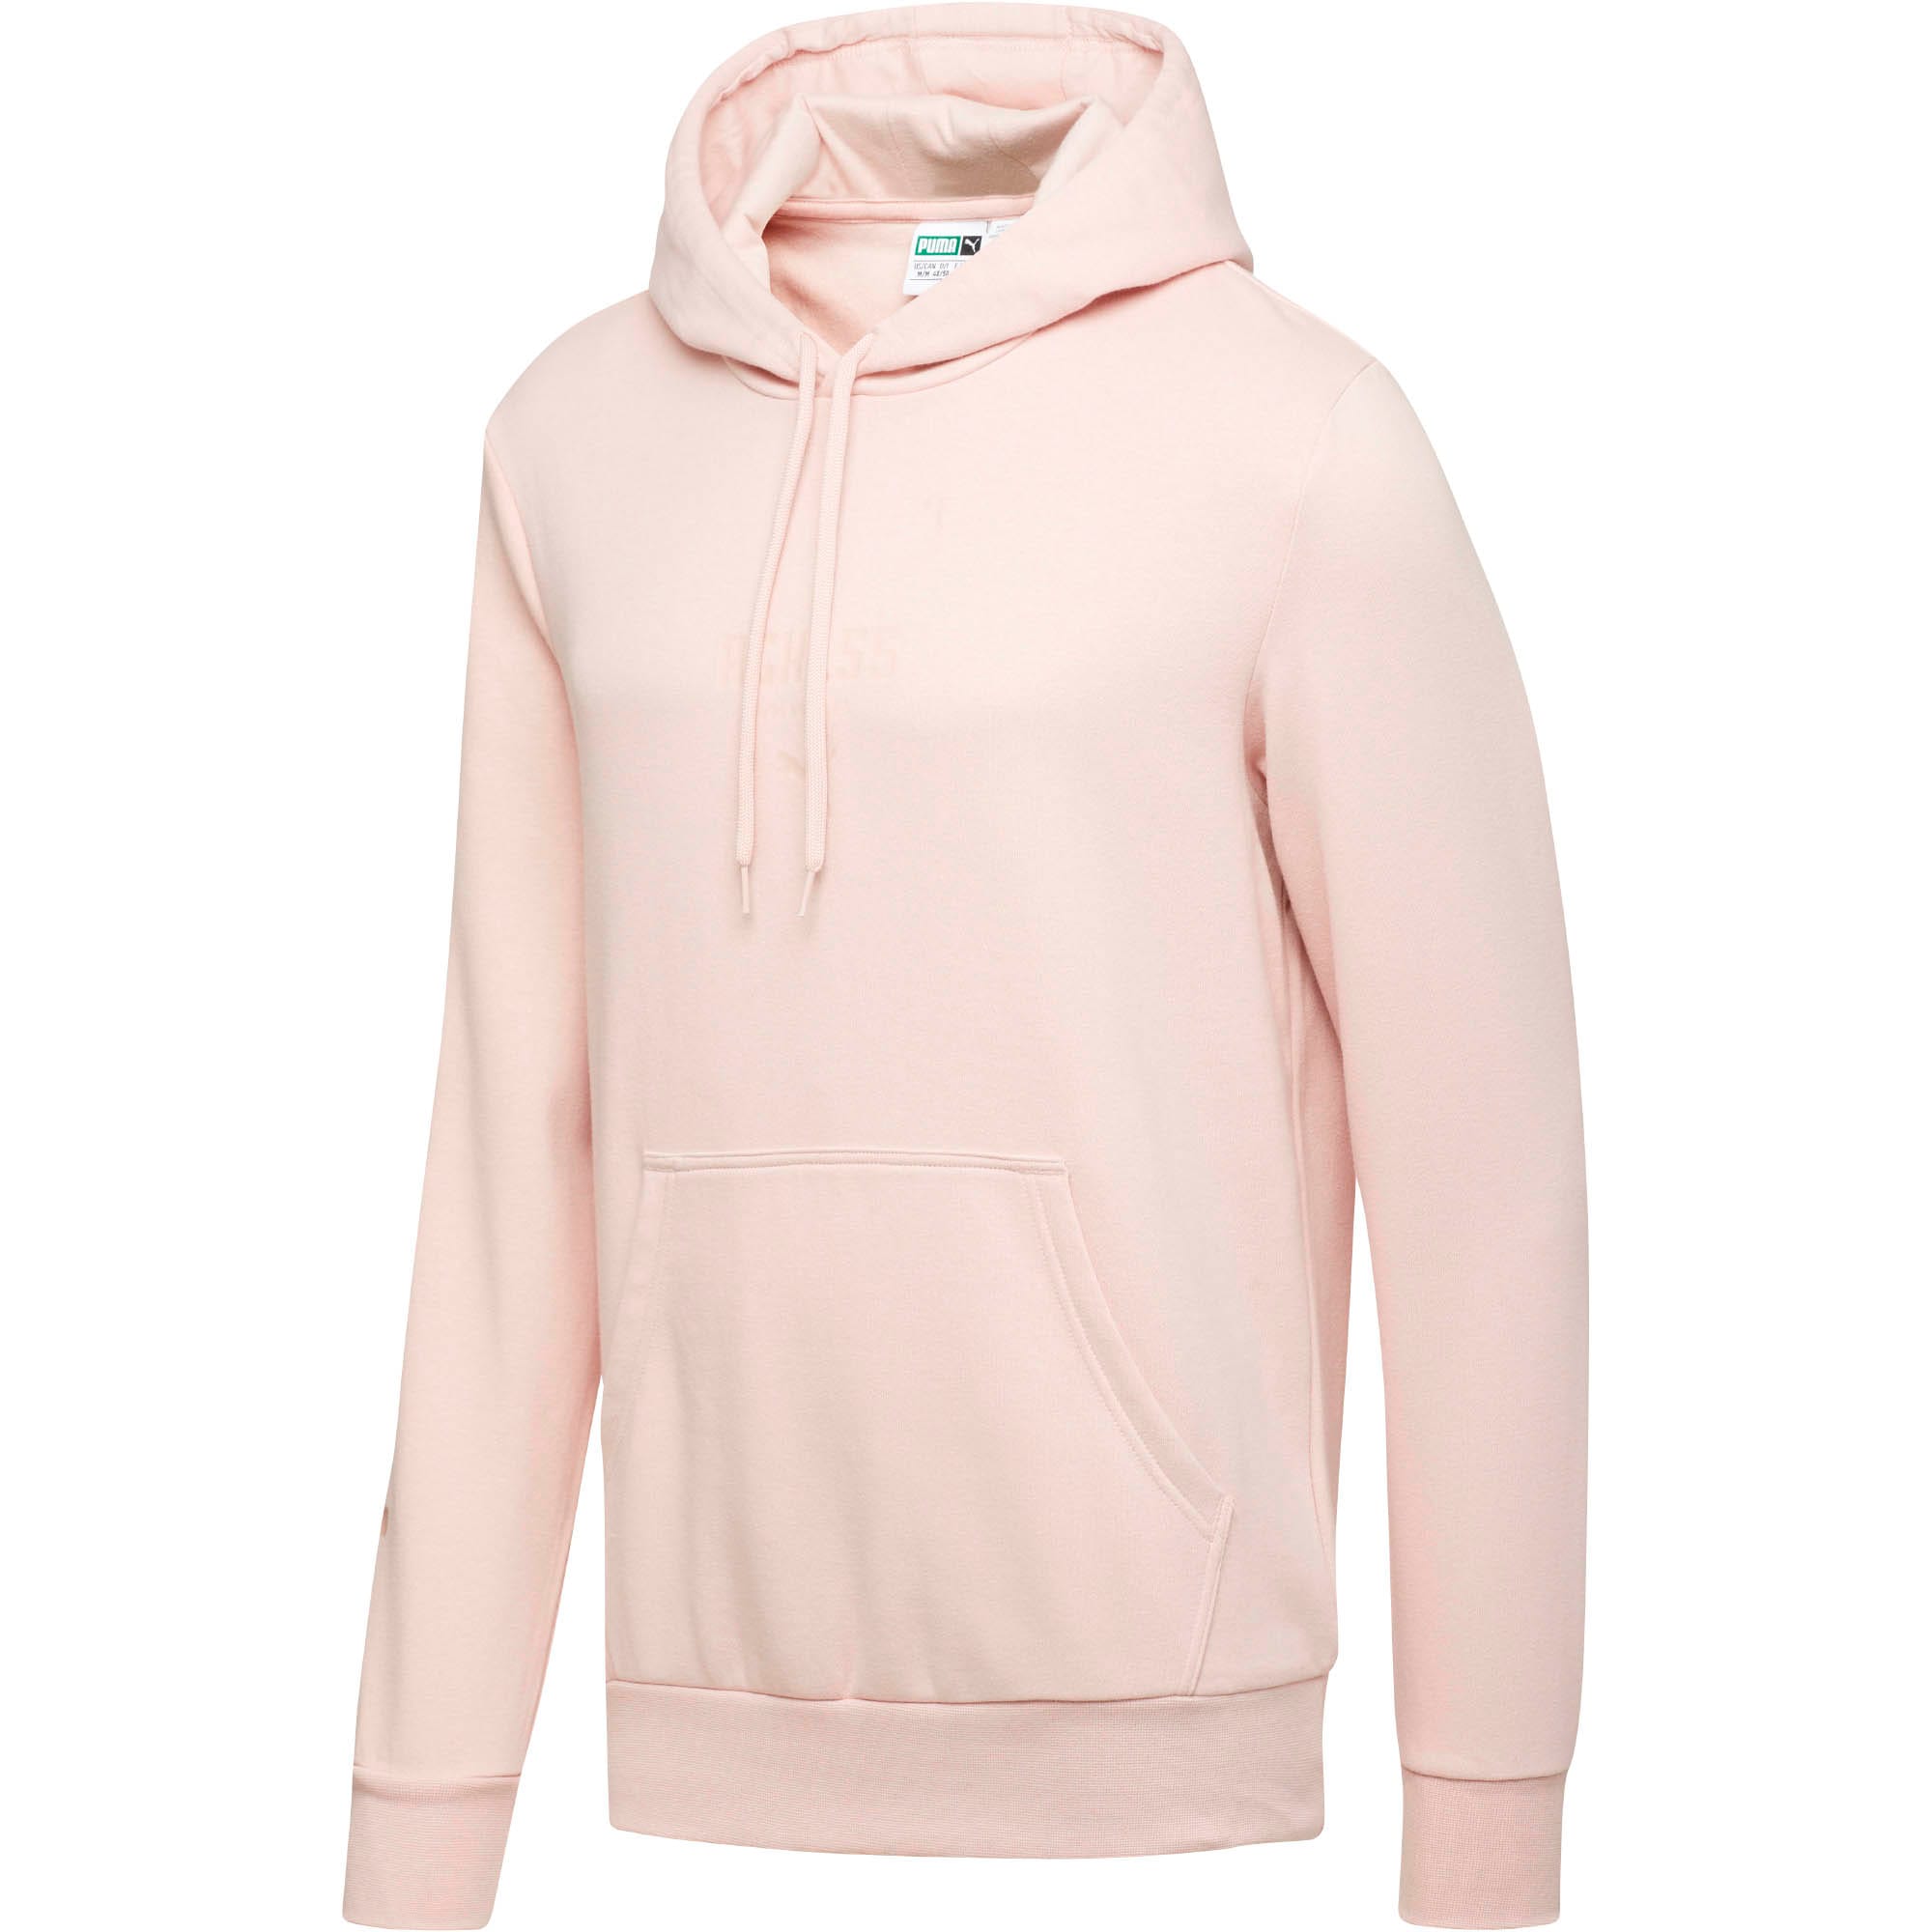 puma x young and reckless hoodie